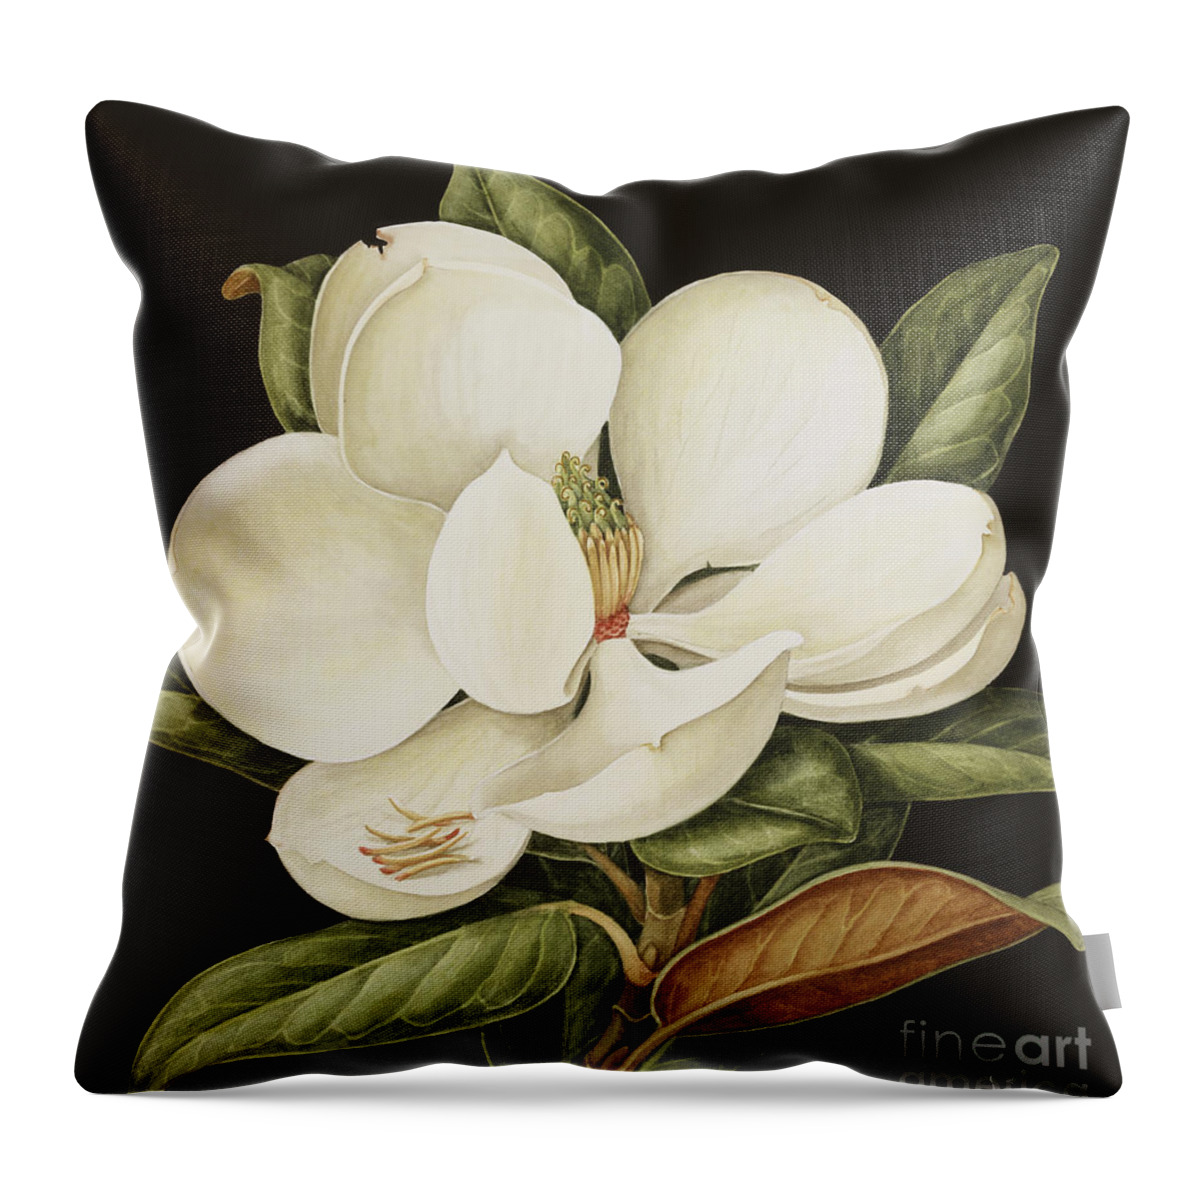 Still-life Throw Pillow featuring the painting Magnolia Grandiflora by Jenny Barron